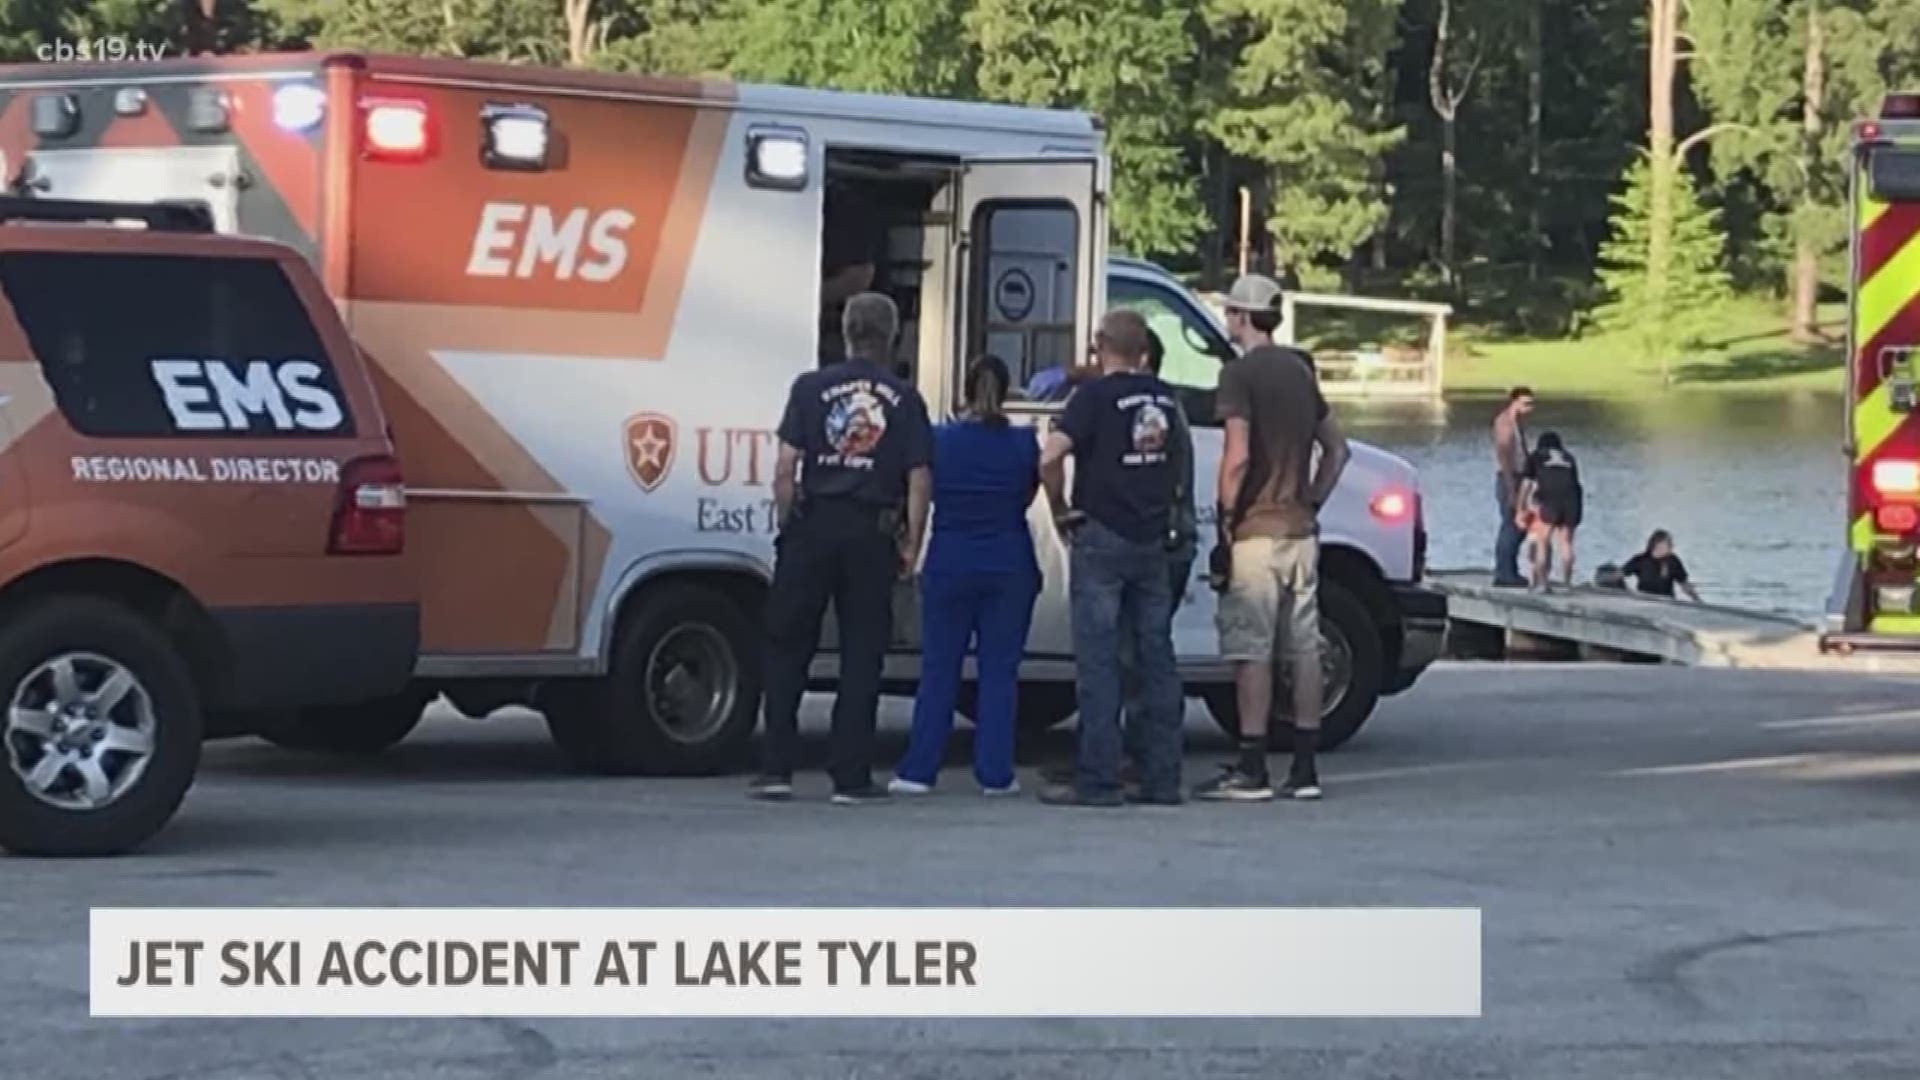 According to the New Chapel Hill Volunteer Fire Department, the man was on a jet ski near the Old Omen Boat Ramp on Lake Tyler East when witnesses say he "looked dazed" and fell into the water.